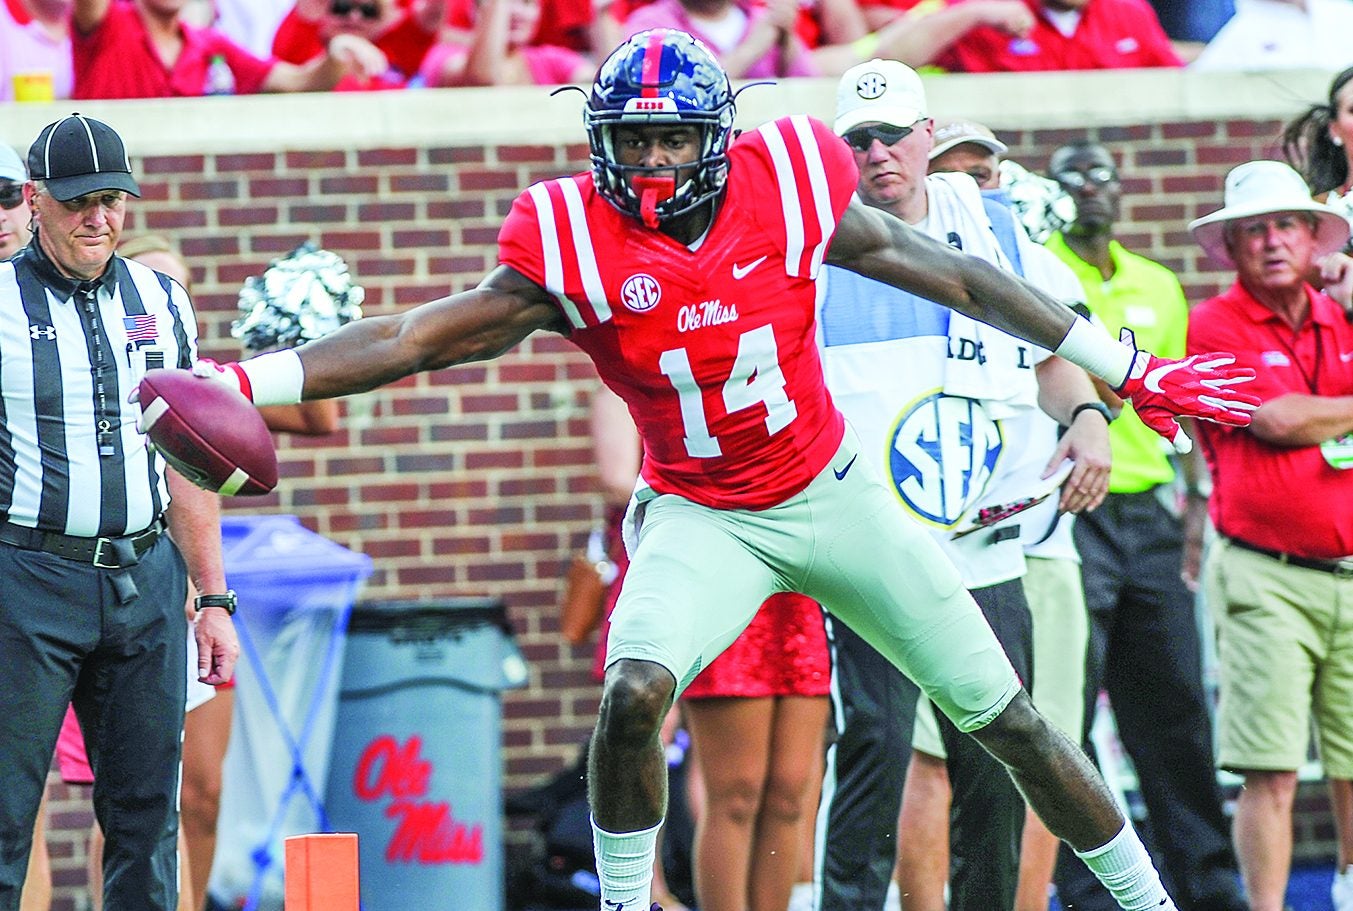 ole-miss-freshman-receiver-dk-metcalf-out-with-broken-foot-the-oxford-eagle-the-oxford-eagle